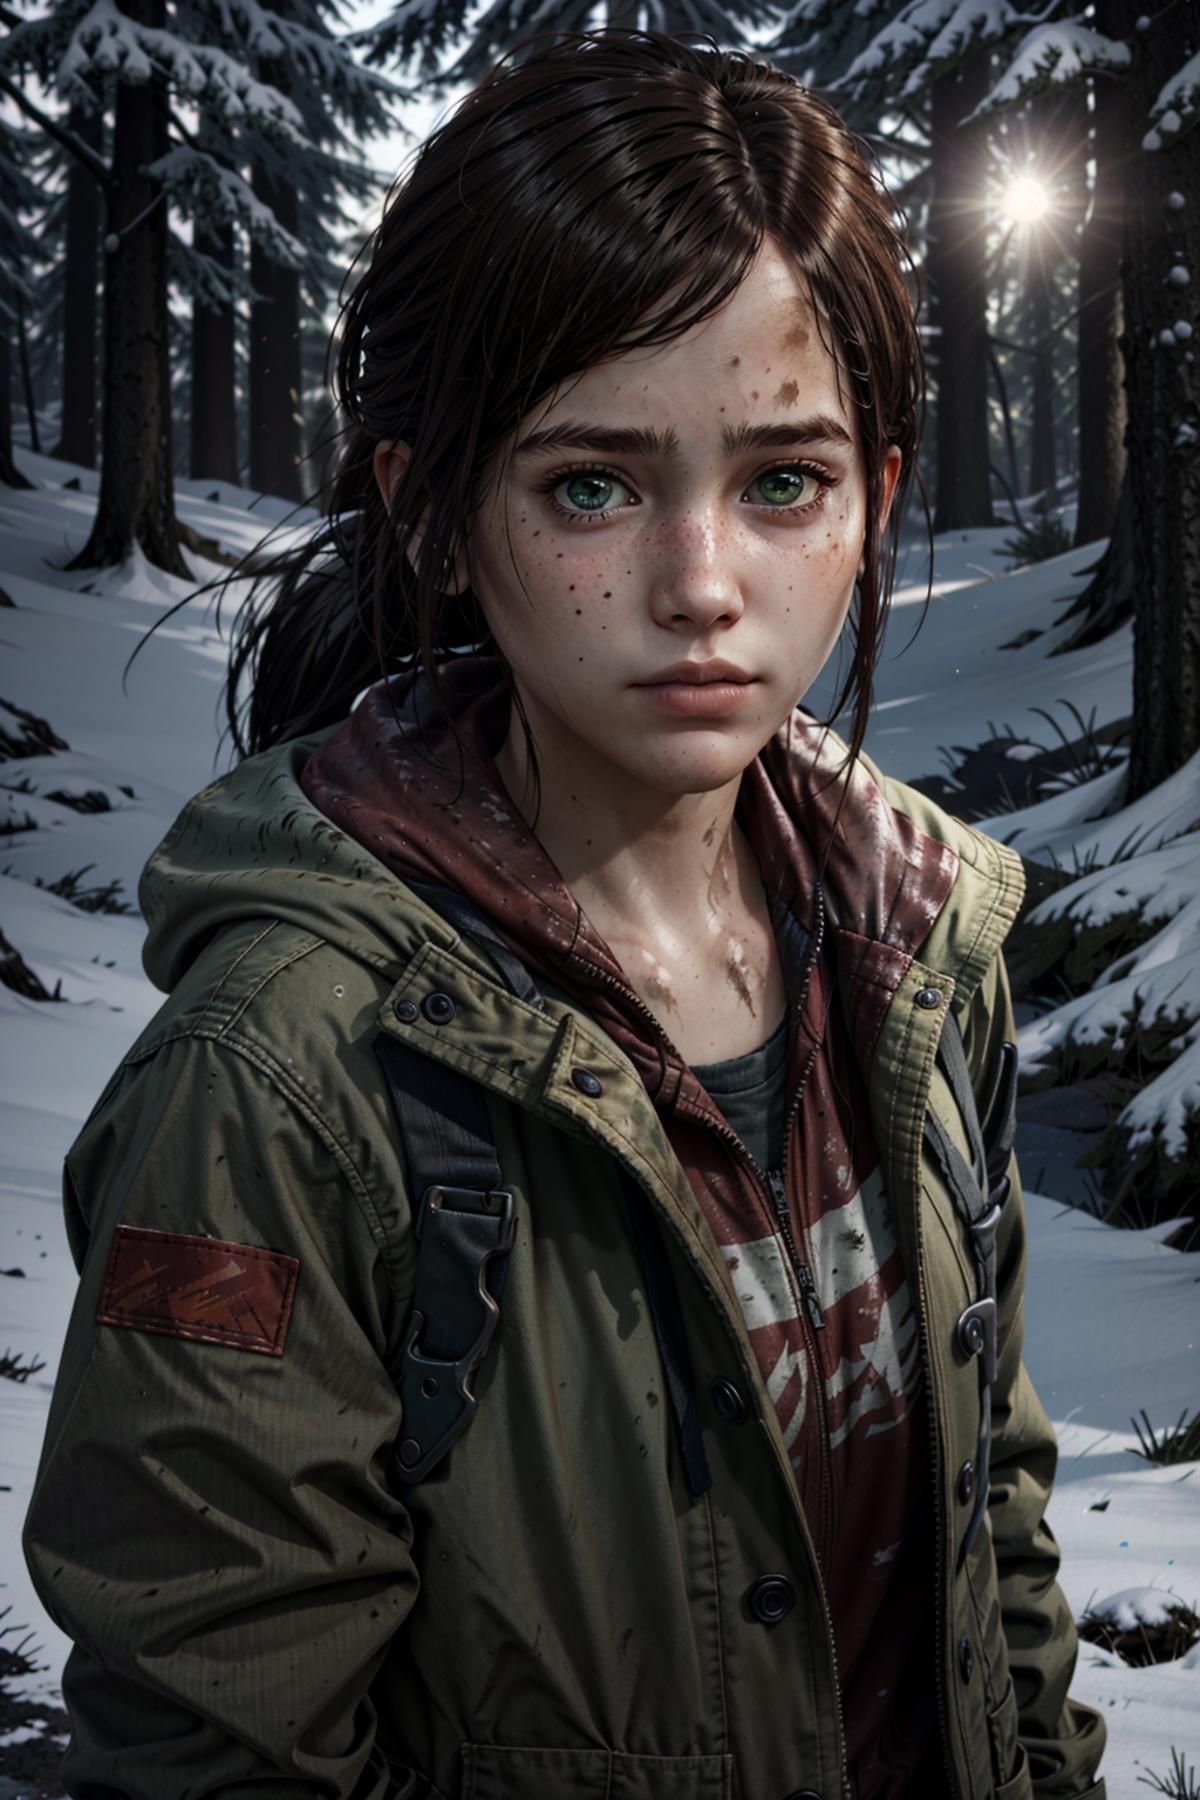 Ellie from The Last of Us image by BloodRedKittie